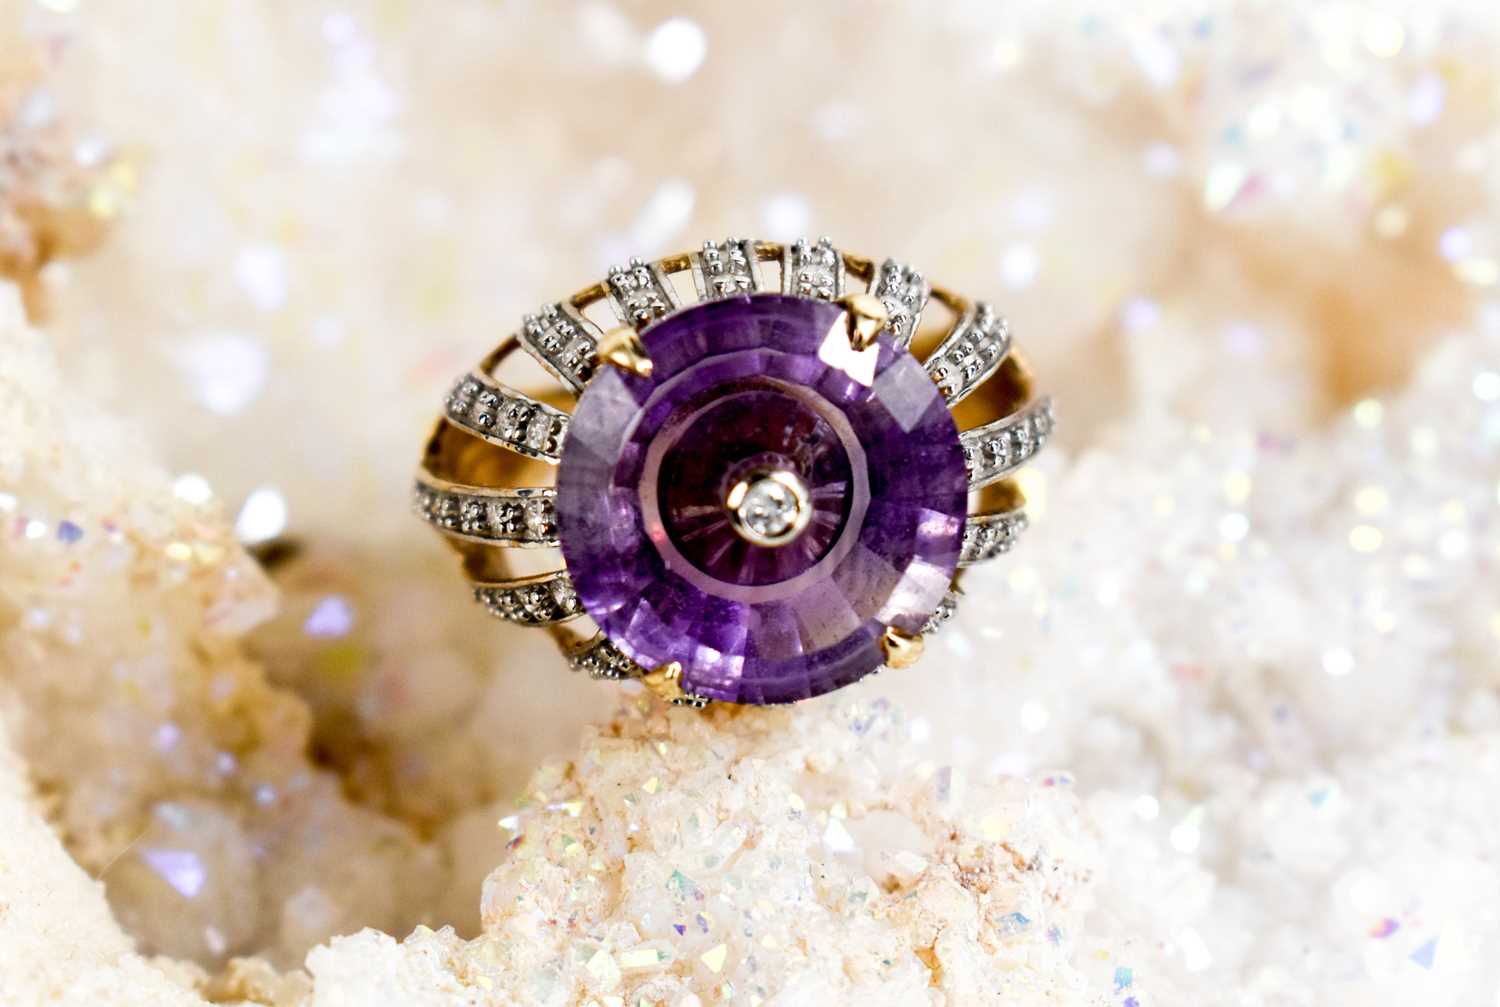 A Lehrer 9ct gold and Torusring amethyst and diamond ring, size O, 5.4g. - Image 7 of 7